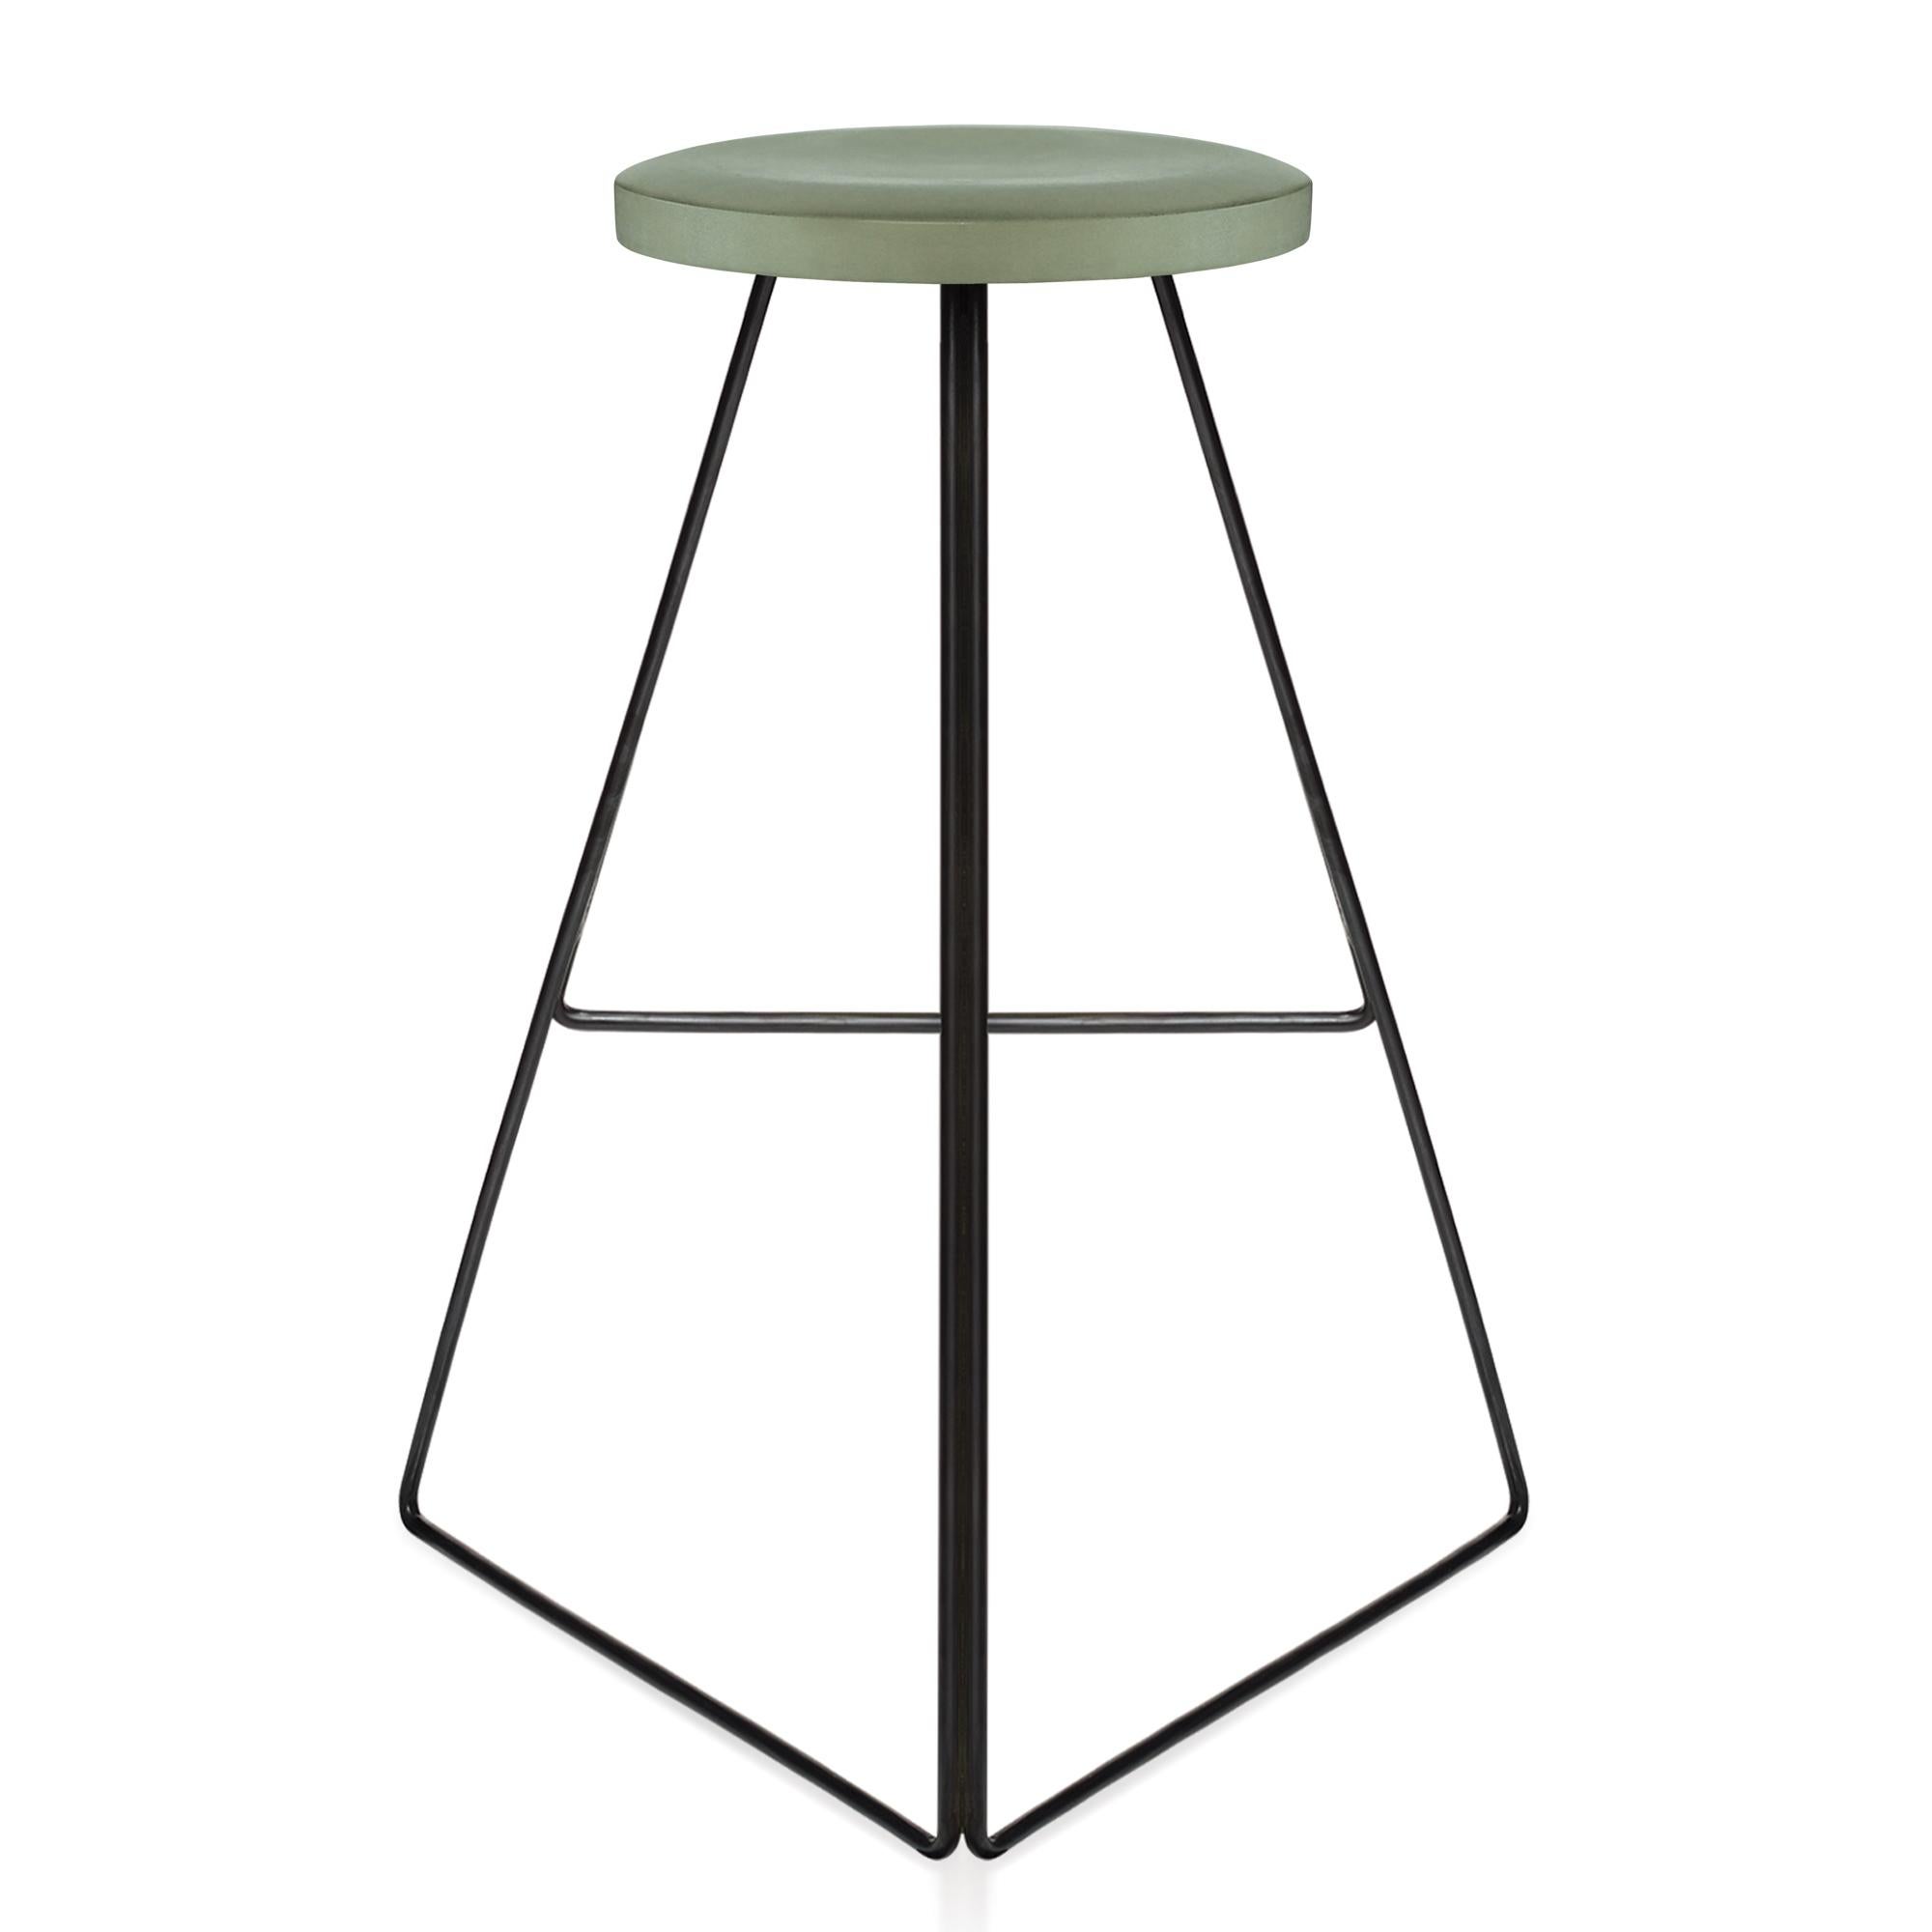 North American Coleman Stool - Aspen Concrete Seat and Black Steel Base, 24